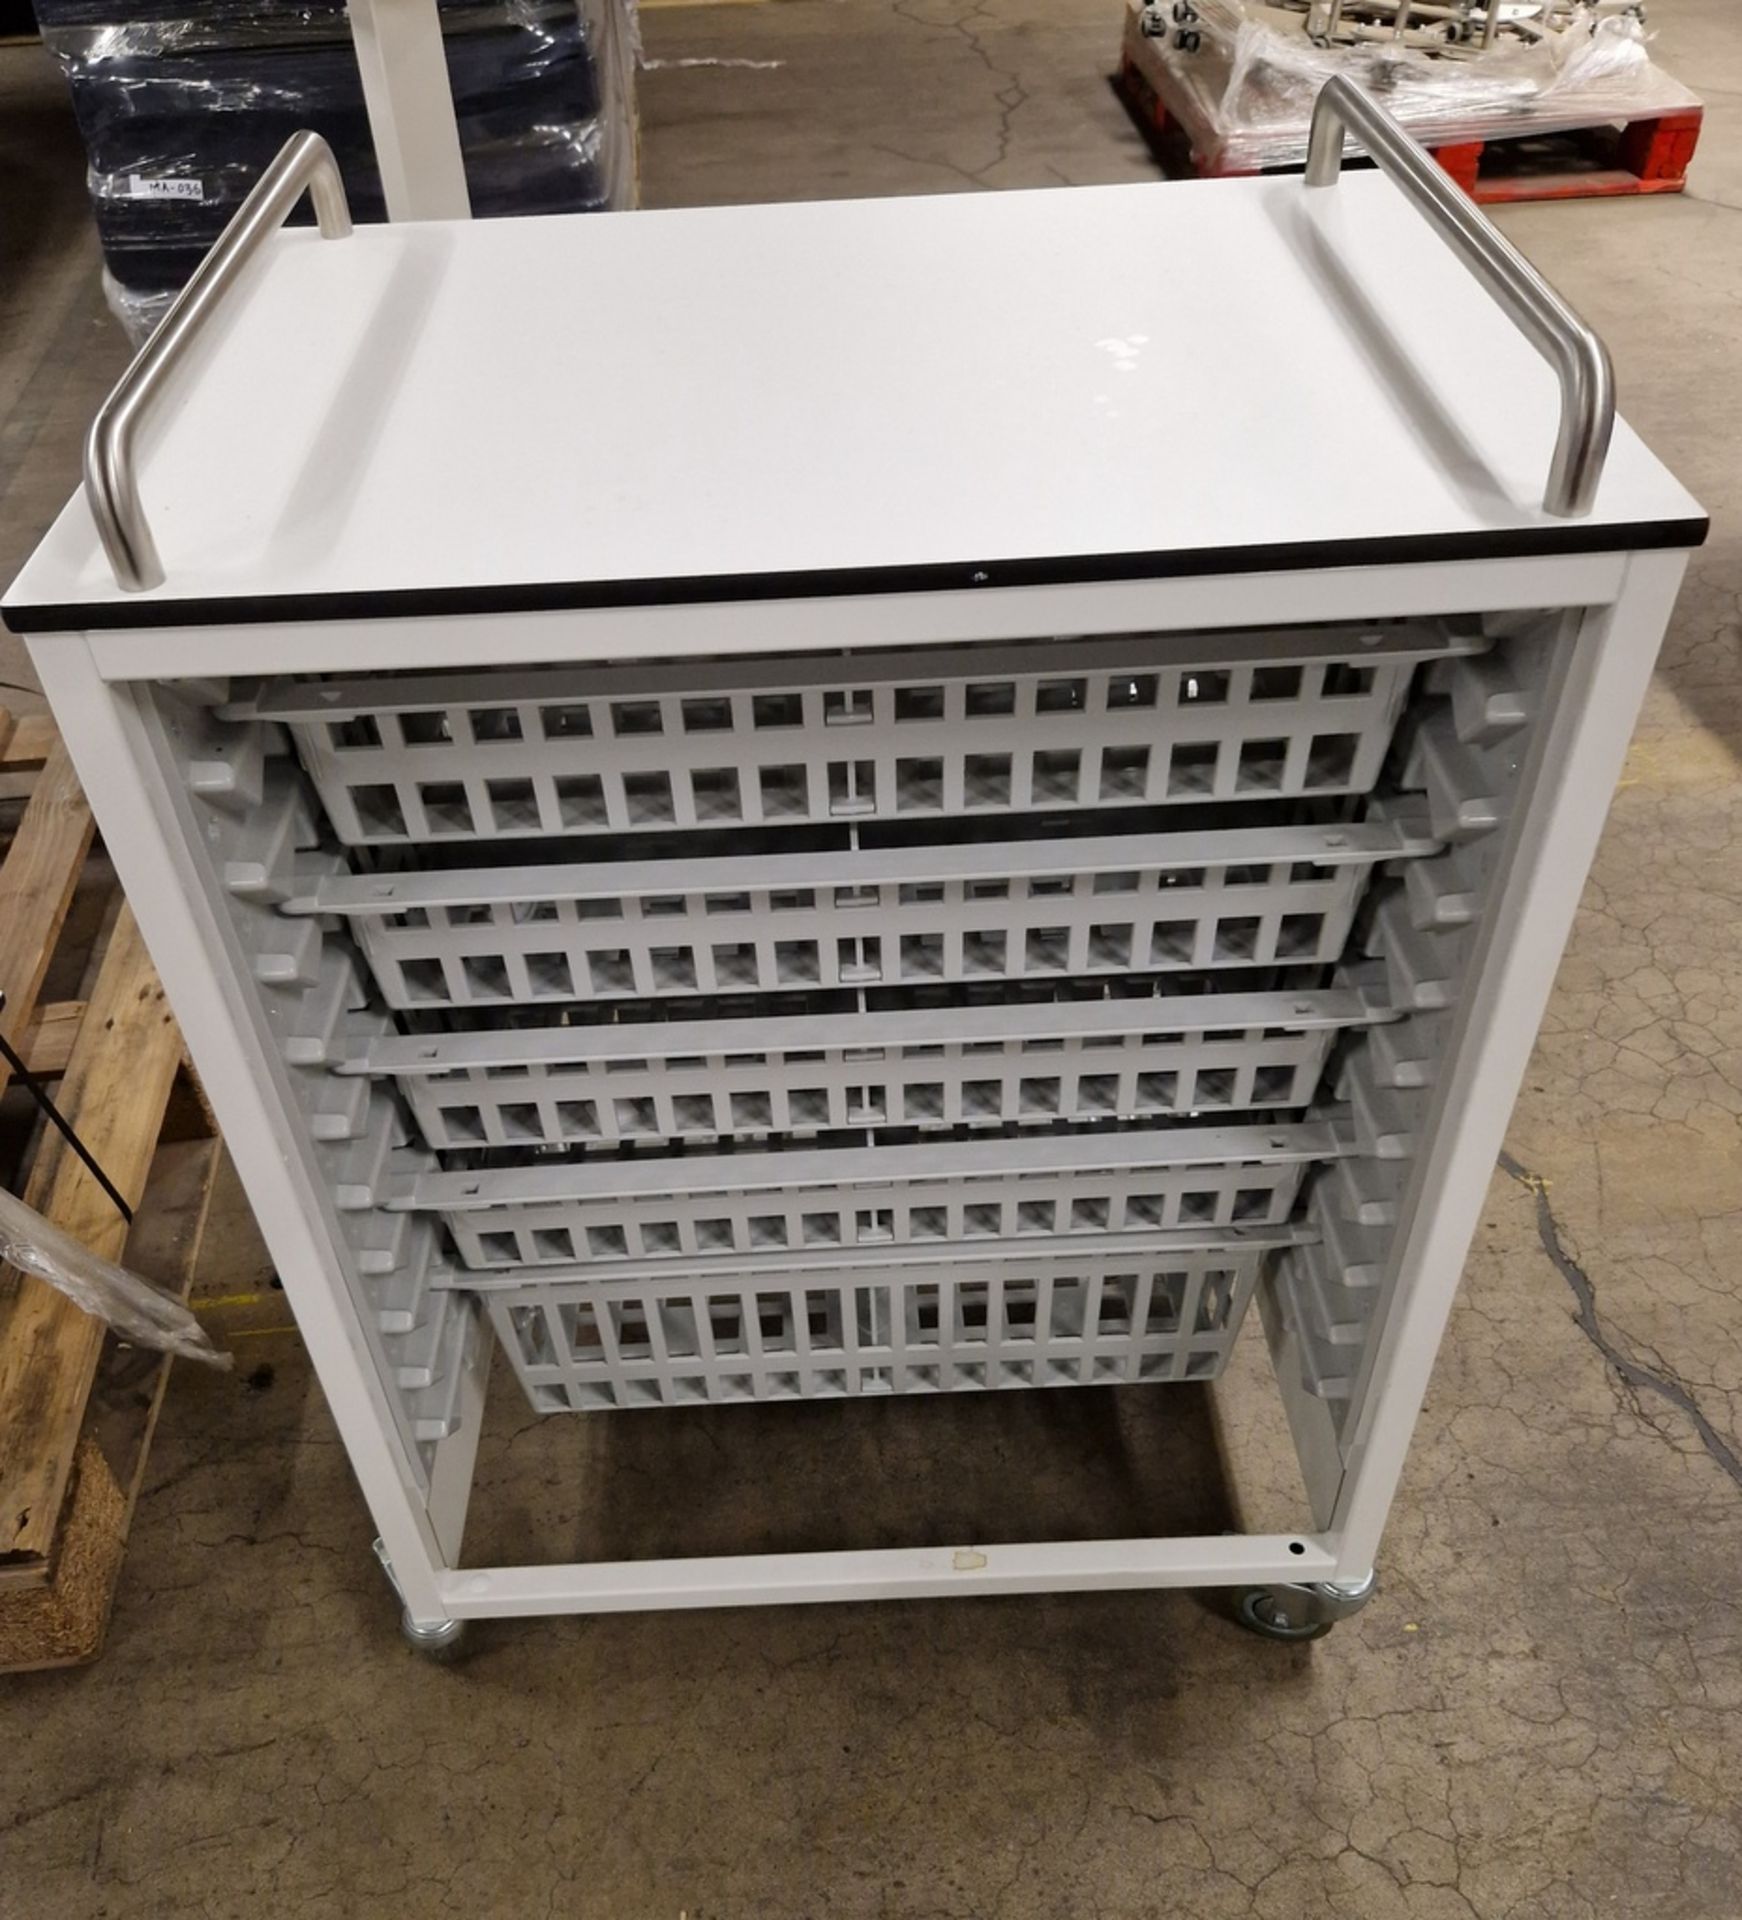 16x dispensing 4 drawer trolley crates 67x48x89cm (LxWxH) - Image 3 of 4